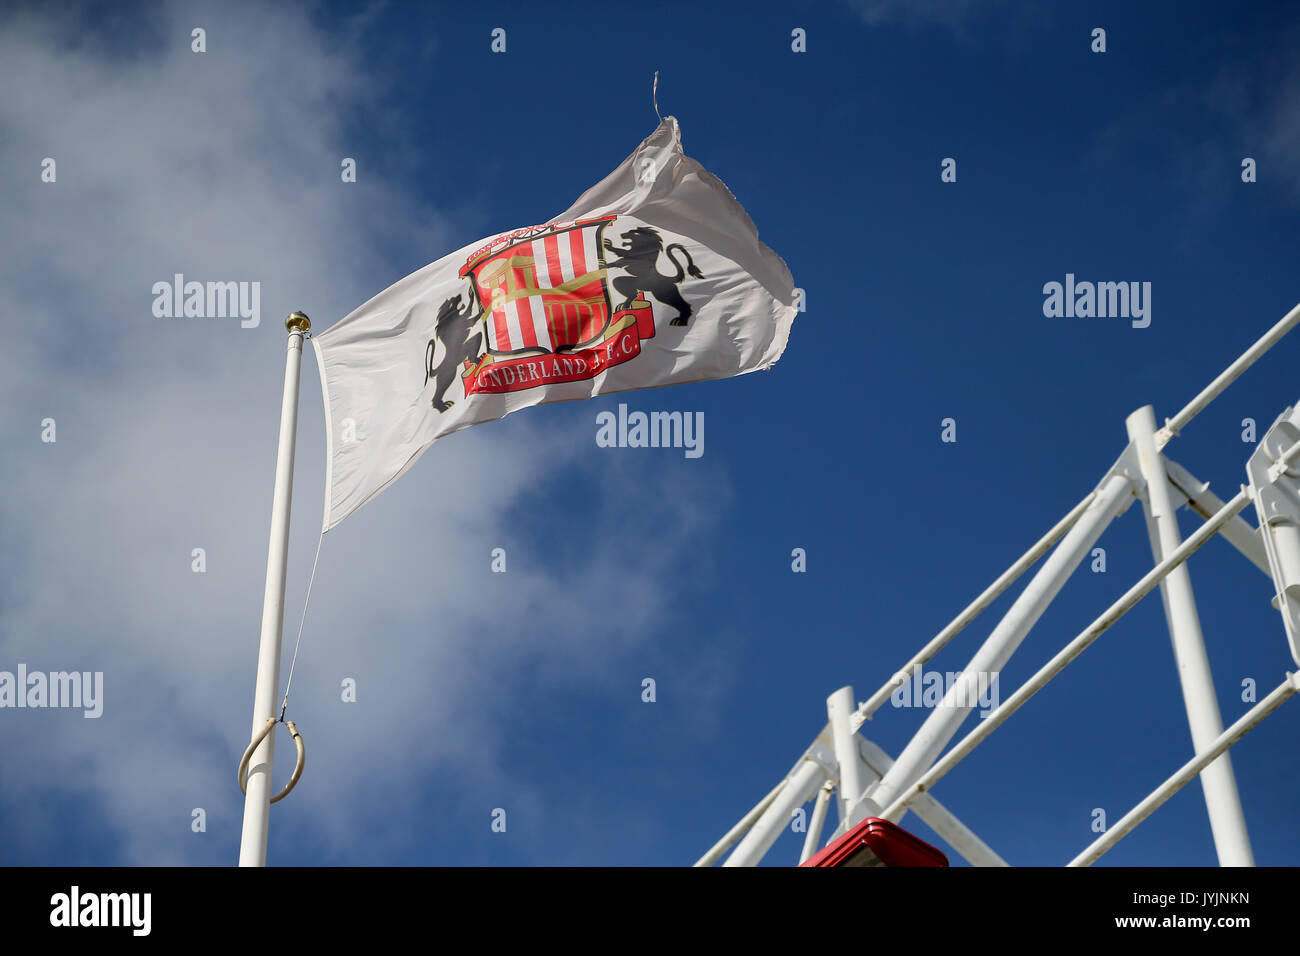 A Sunderland flag blows in the wind before the Sky Bet Championship match at the Stadium of Light, Sunderland. Stock Photo